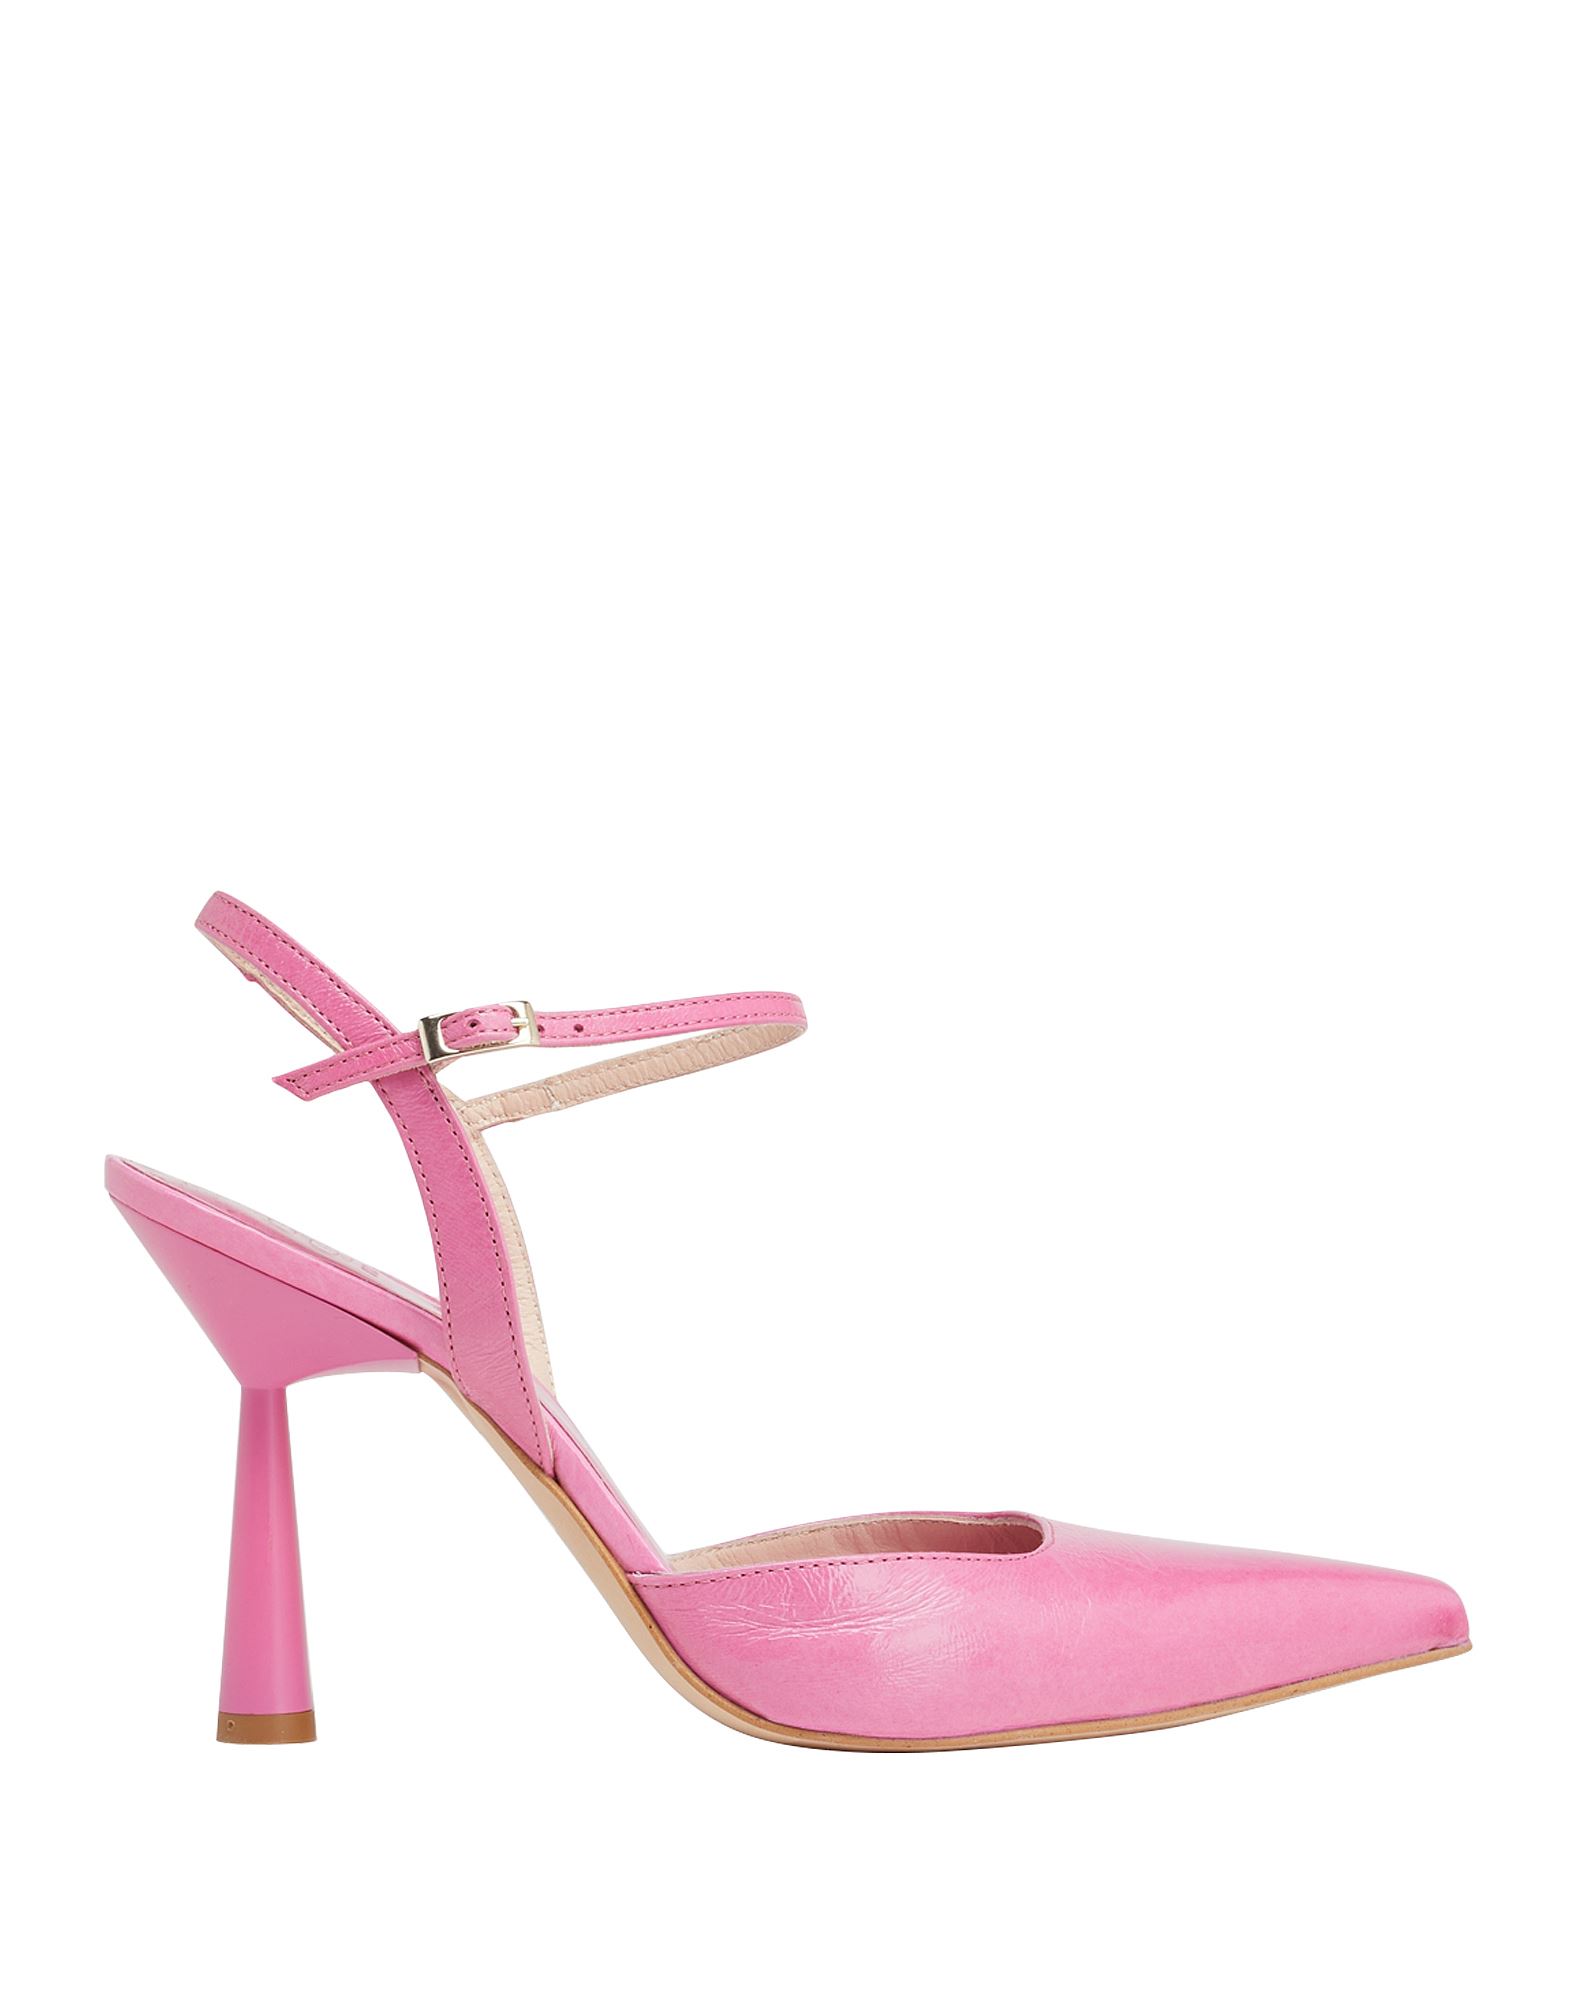 8 By Yoox Pumps In Pink